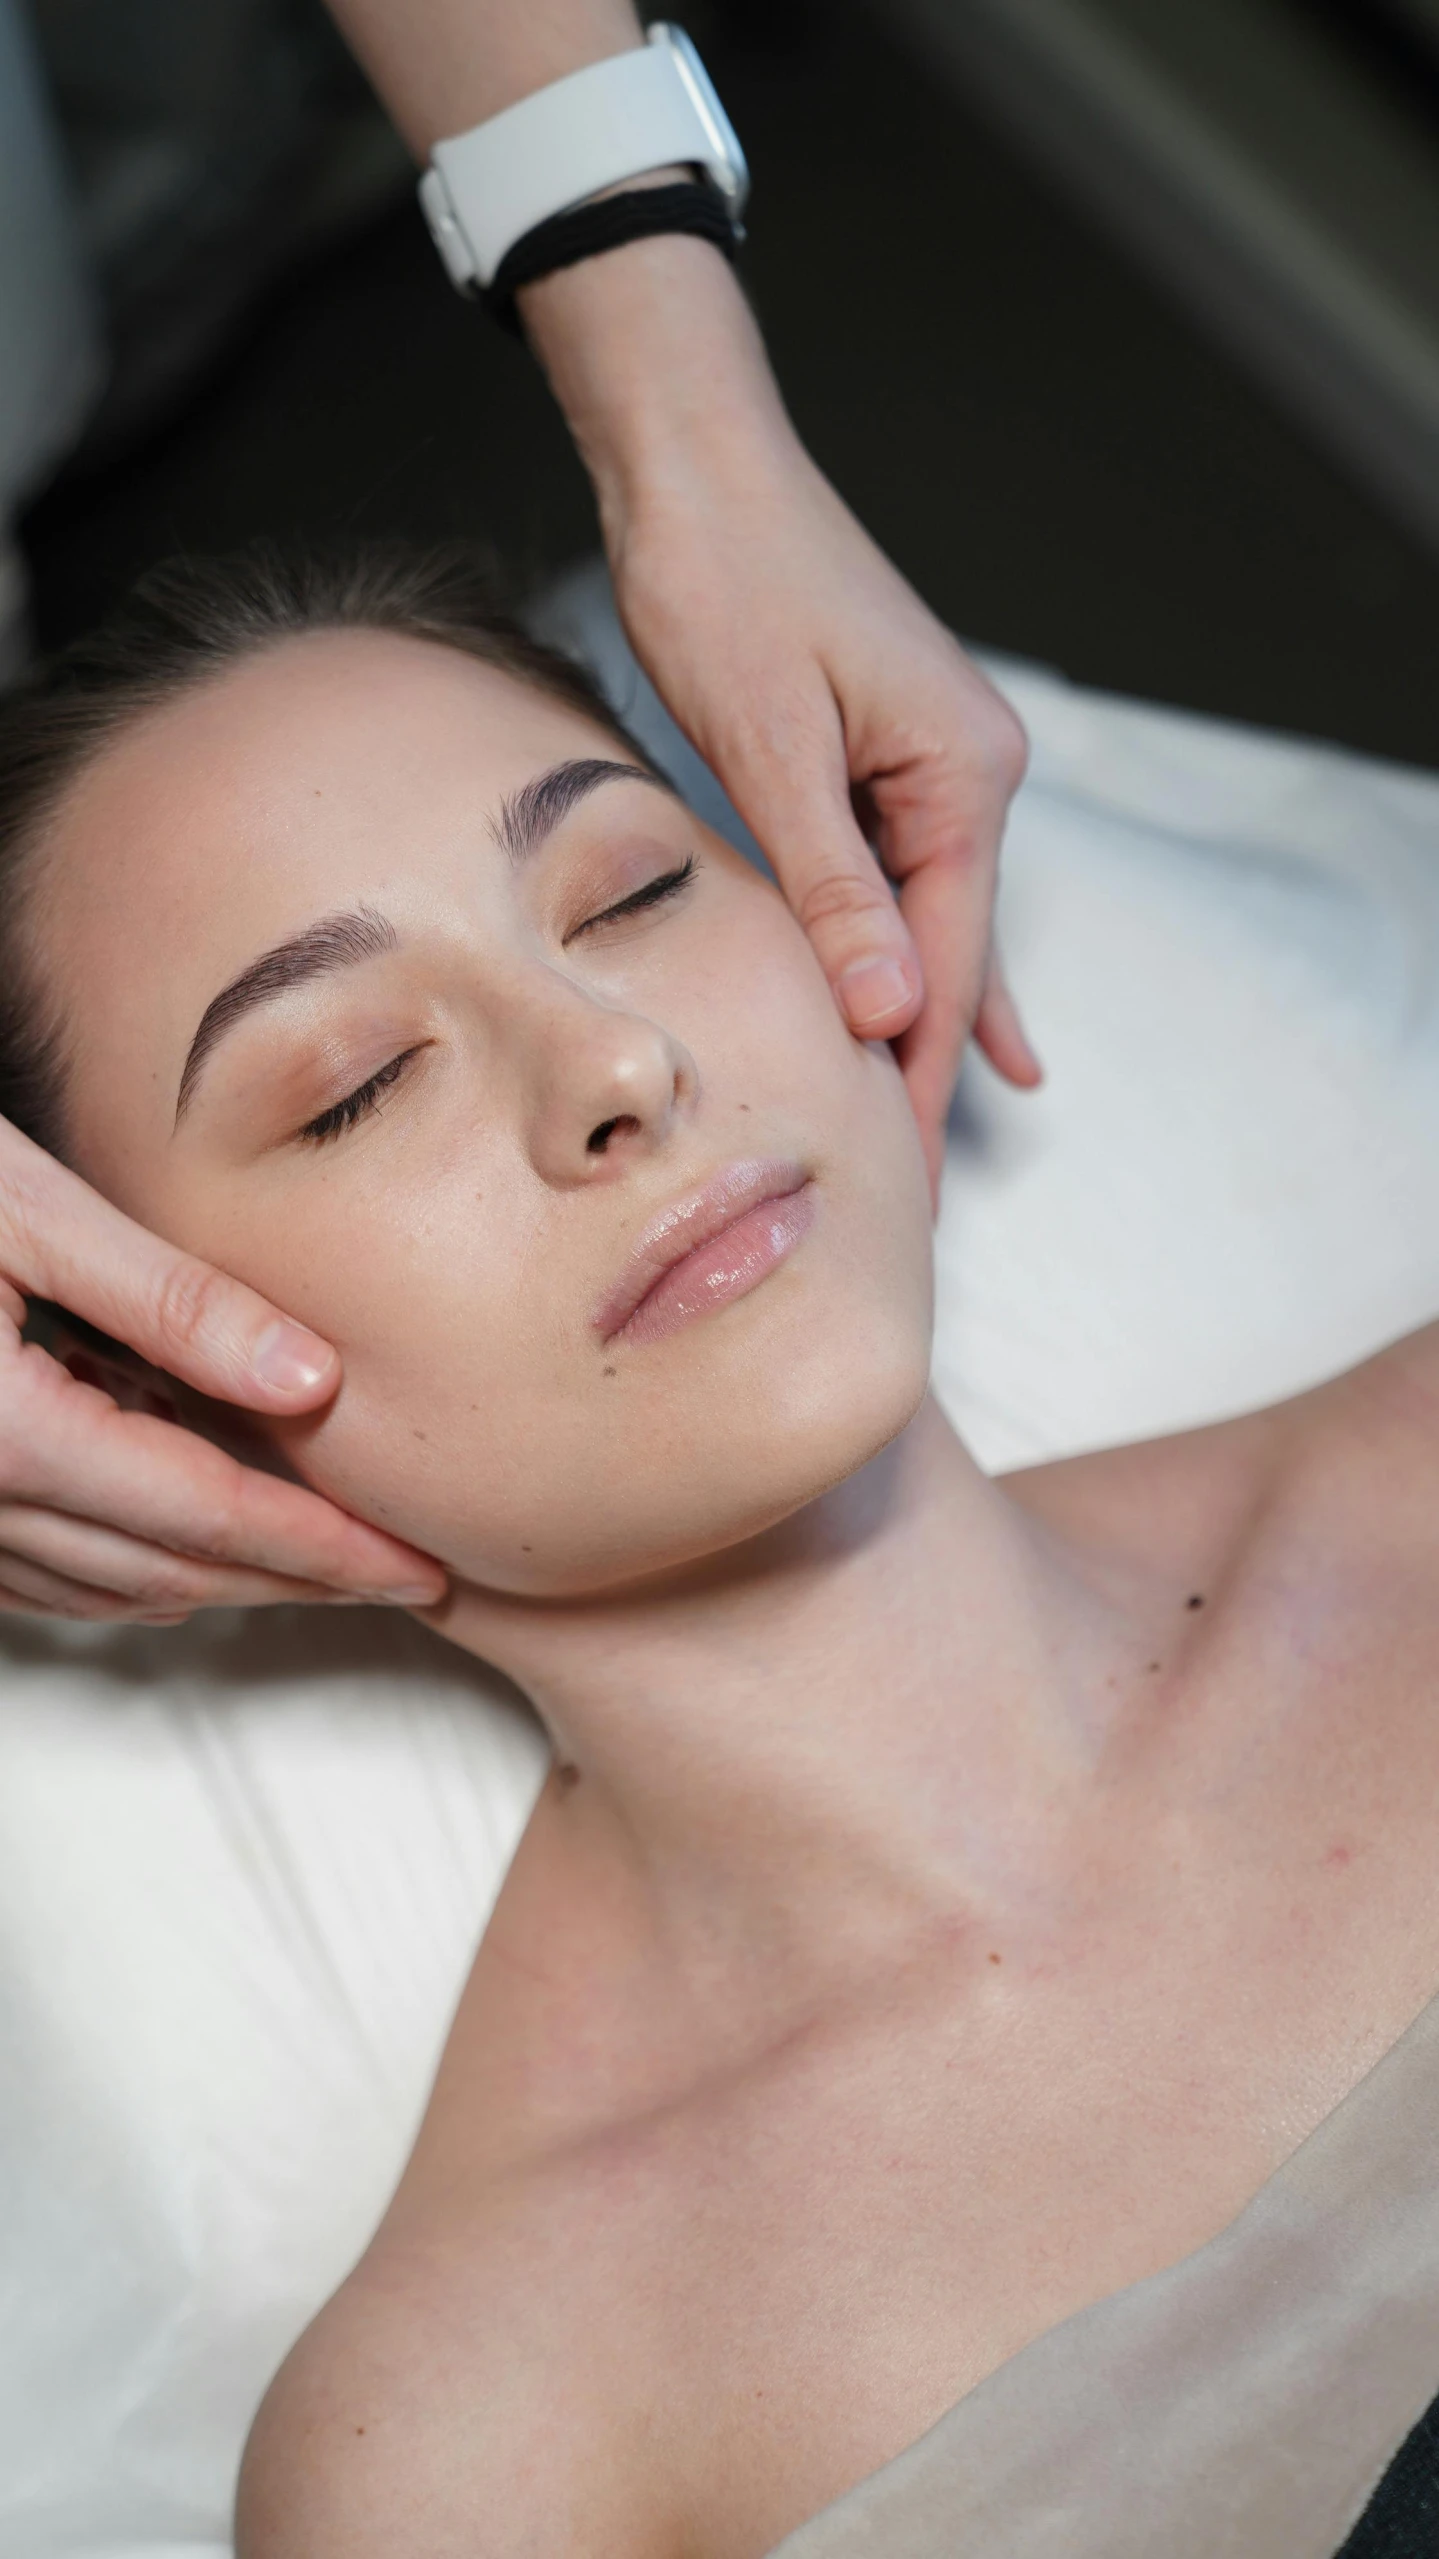 a woman getting a facial massage at a spa, by Robbie Trevino, shutterstock, massurrealism, square facial structure, sleepy fashion model face, soft flawless pale skin, instagram photo